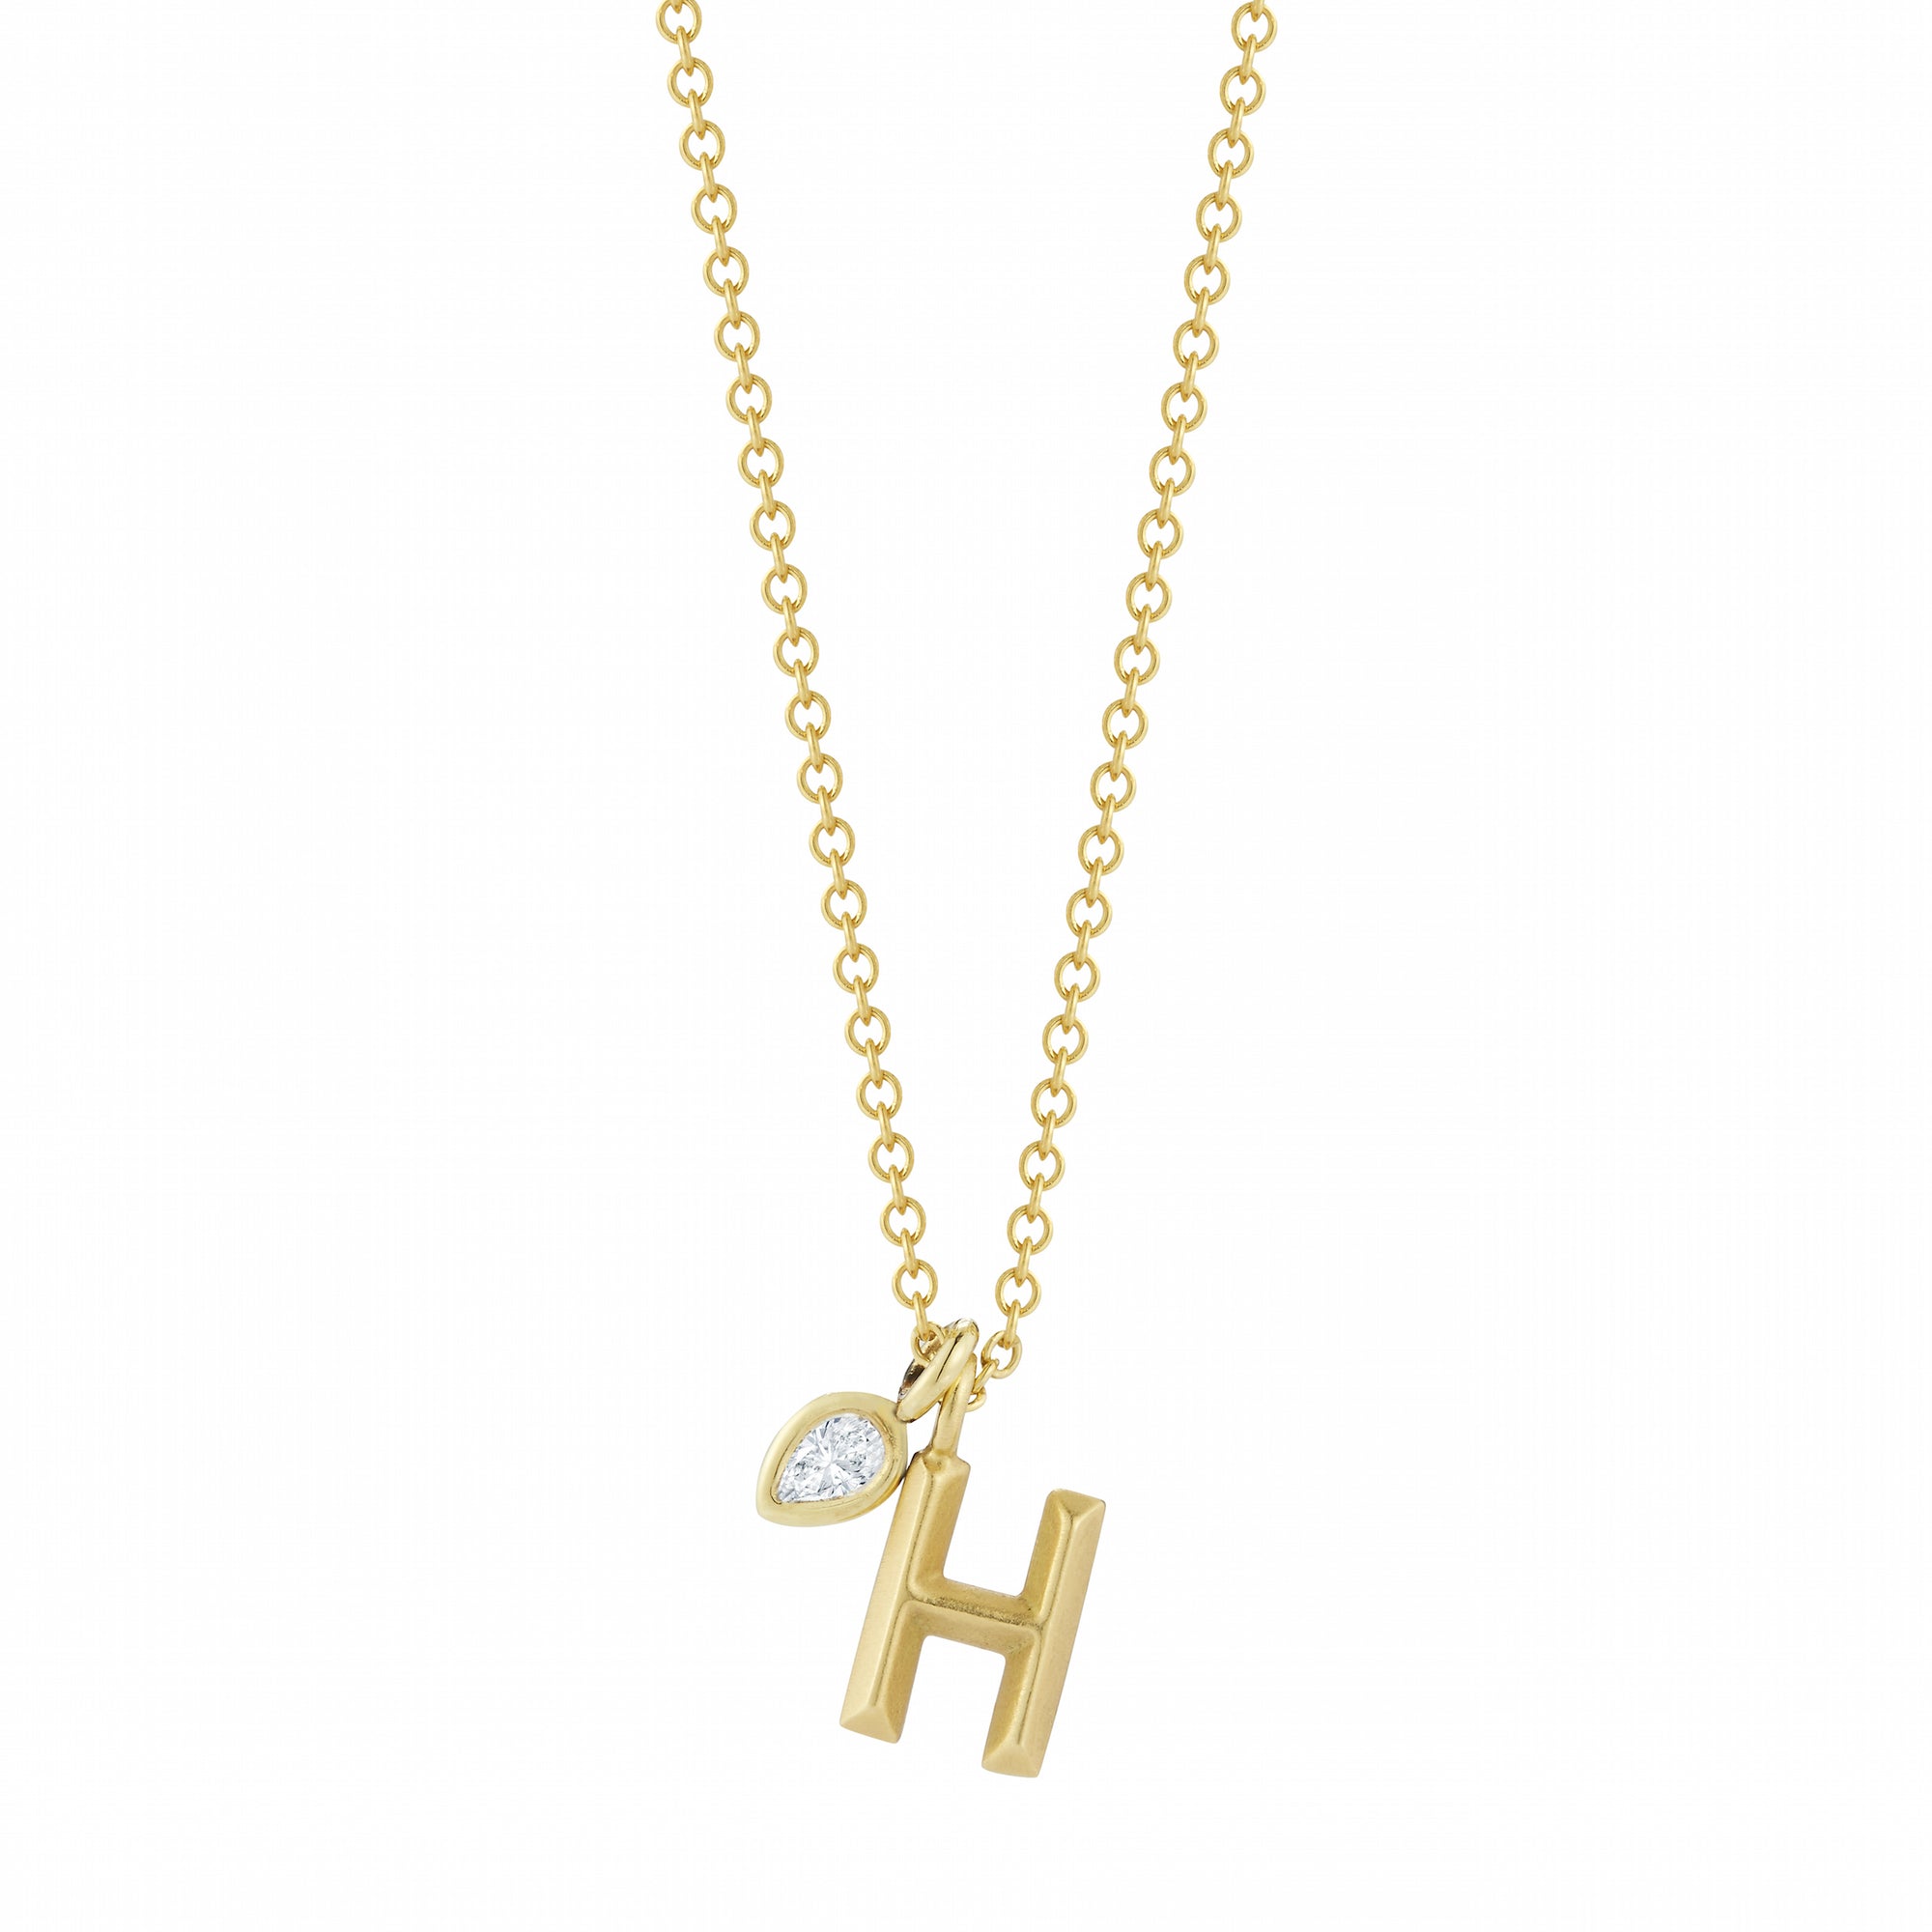 SIMPLE LETTER NECKLACE WITH A DIAMOND ACCENT